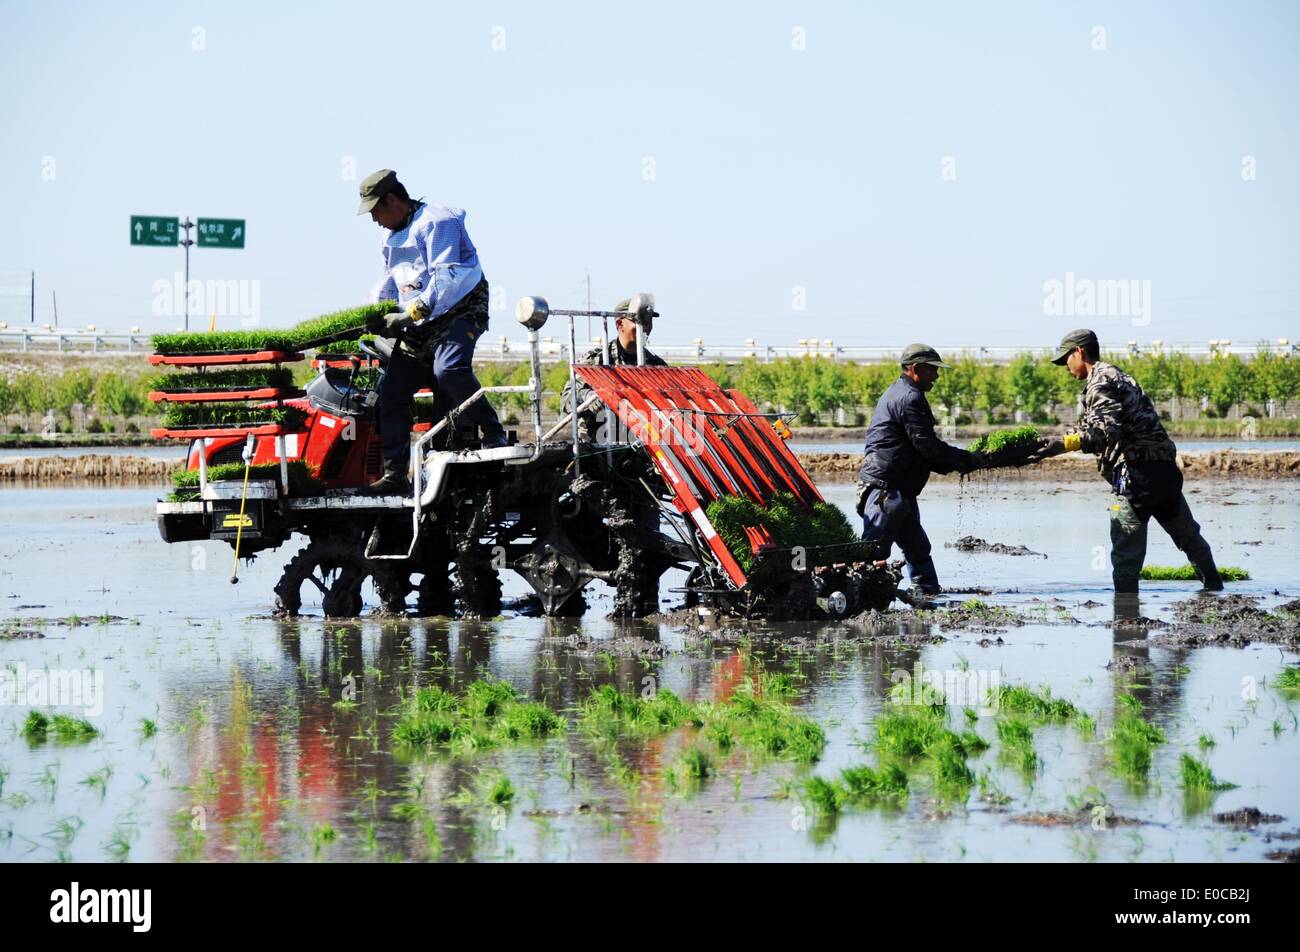 (140509) -- NO.291 FARM, May 9, 2014 (Xinhua) -- Farmers drive a rice transplanter as they plant rice seedlings in the field at the No. 291 Farm, northeast China's Heilongjiang Province, May 9, 2014. Farmers at the No. 291 Farm, which has 300,000 mu (20,000 hectares) of paddy field, are busy with planting as weather warms up. (Xinhua/Wang Jianwei) (lfj) Stock Photo